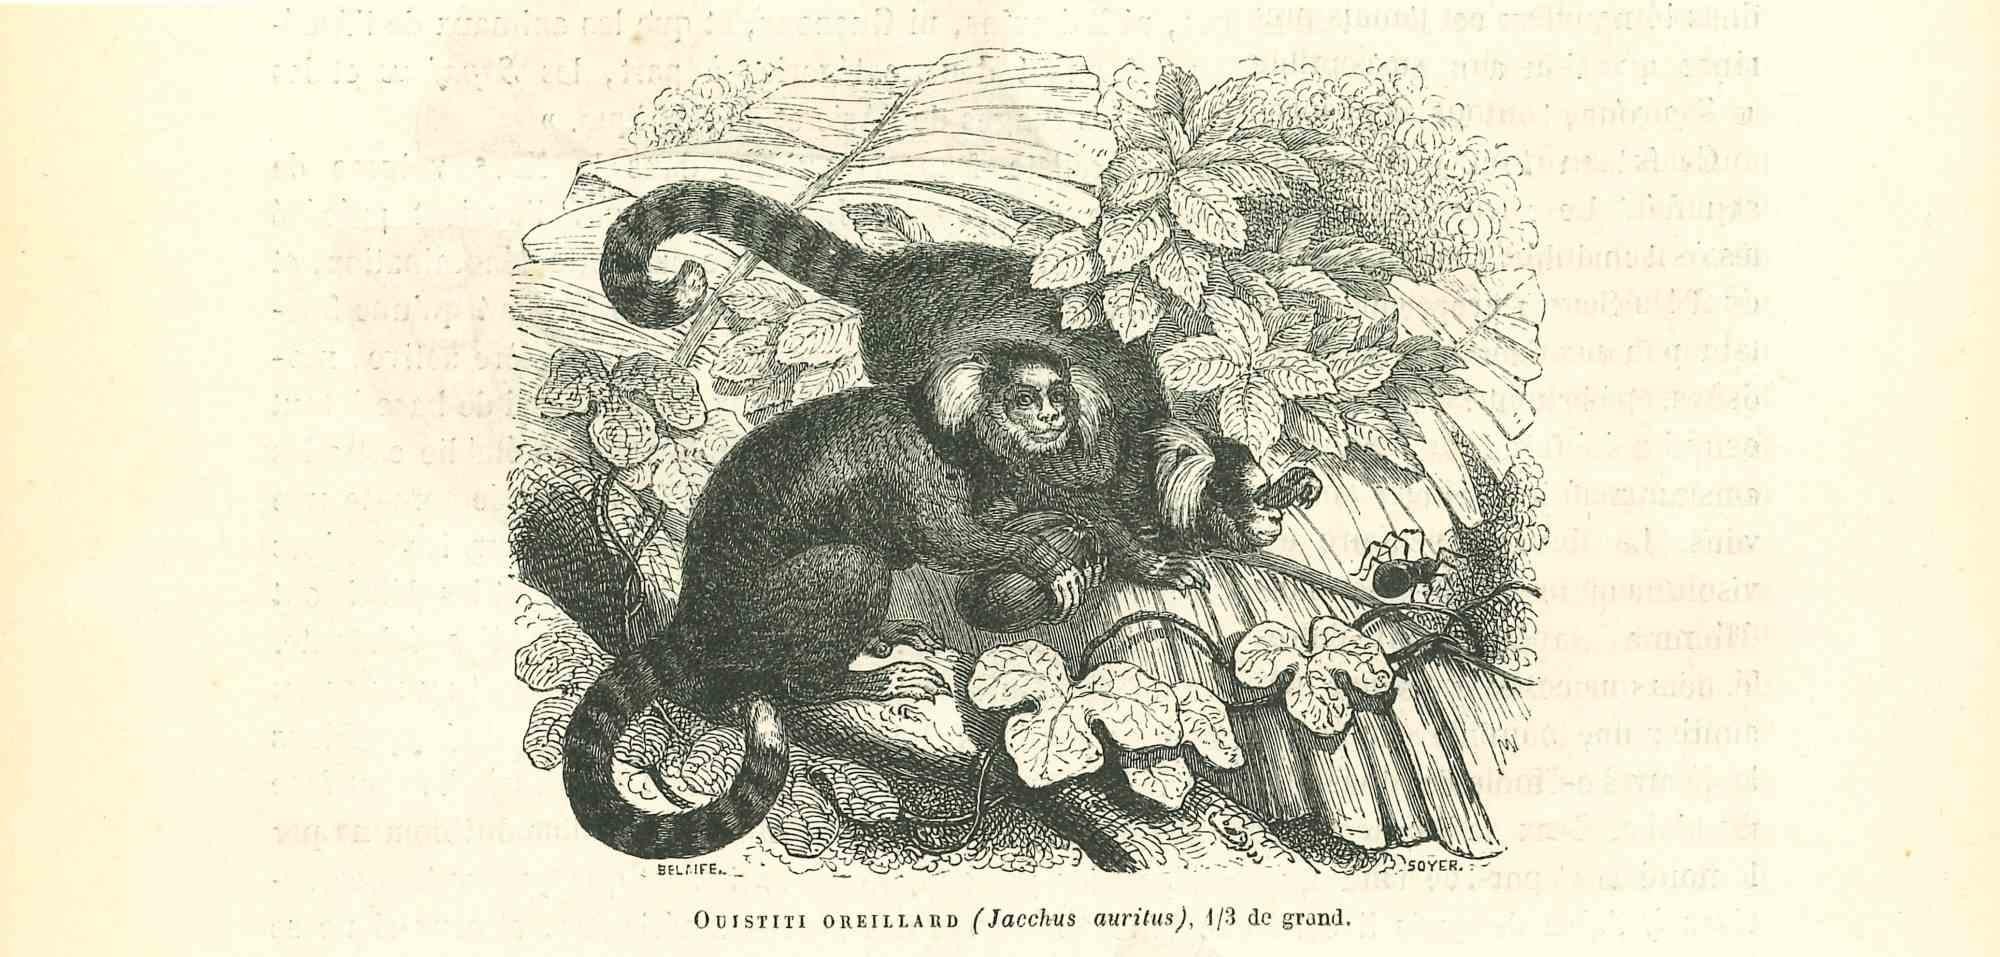 The Monkey is a lithograph on ivory-colored paper, realized by Paul Gervais (1816-1879). The artwork is from The Series of "Les Trois Règnes de la Nature", and was published in 1854.

Good conditions.

Titled on the lower. With the notes on the